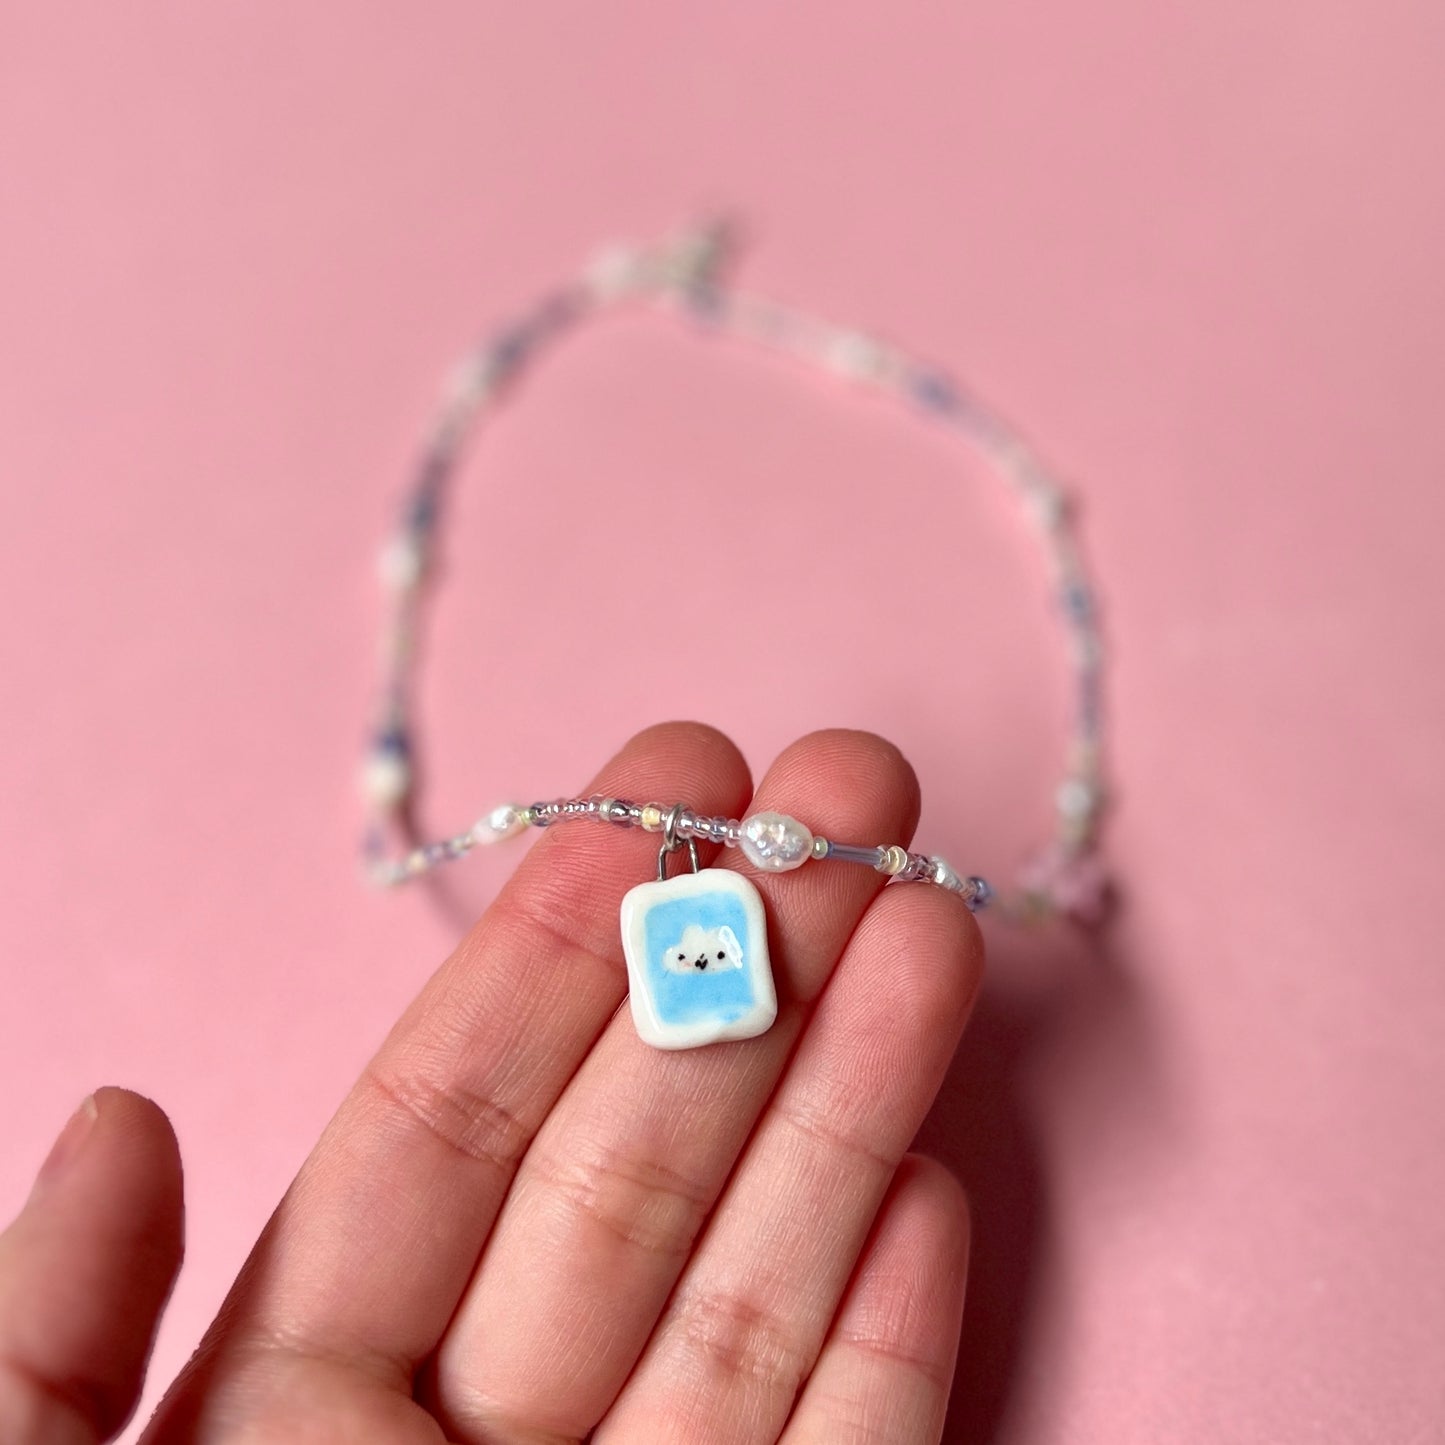 Blue Skies Necklace